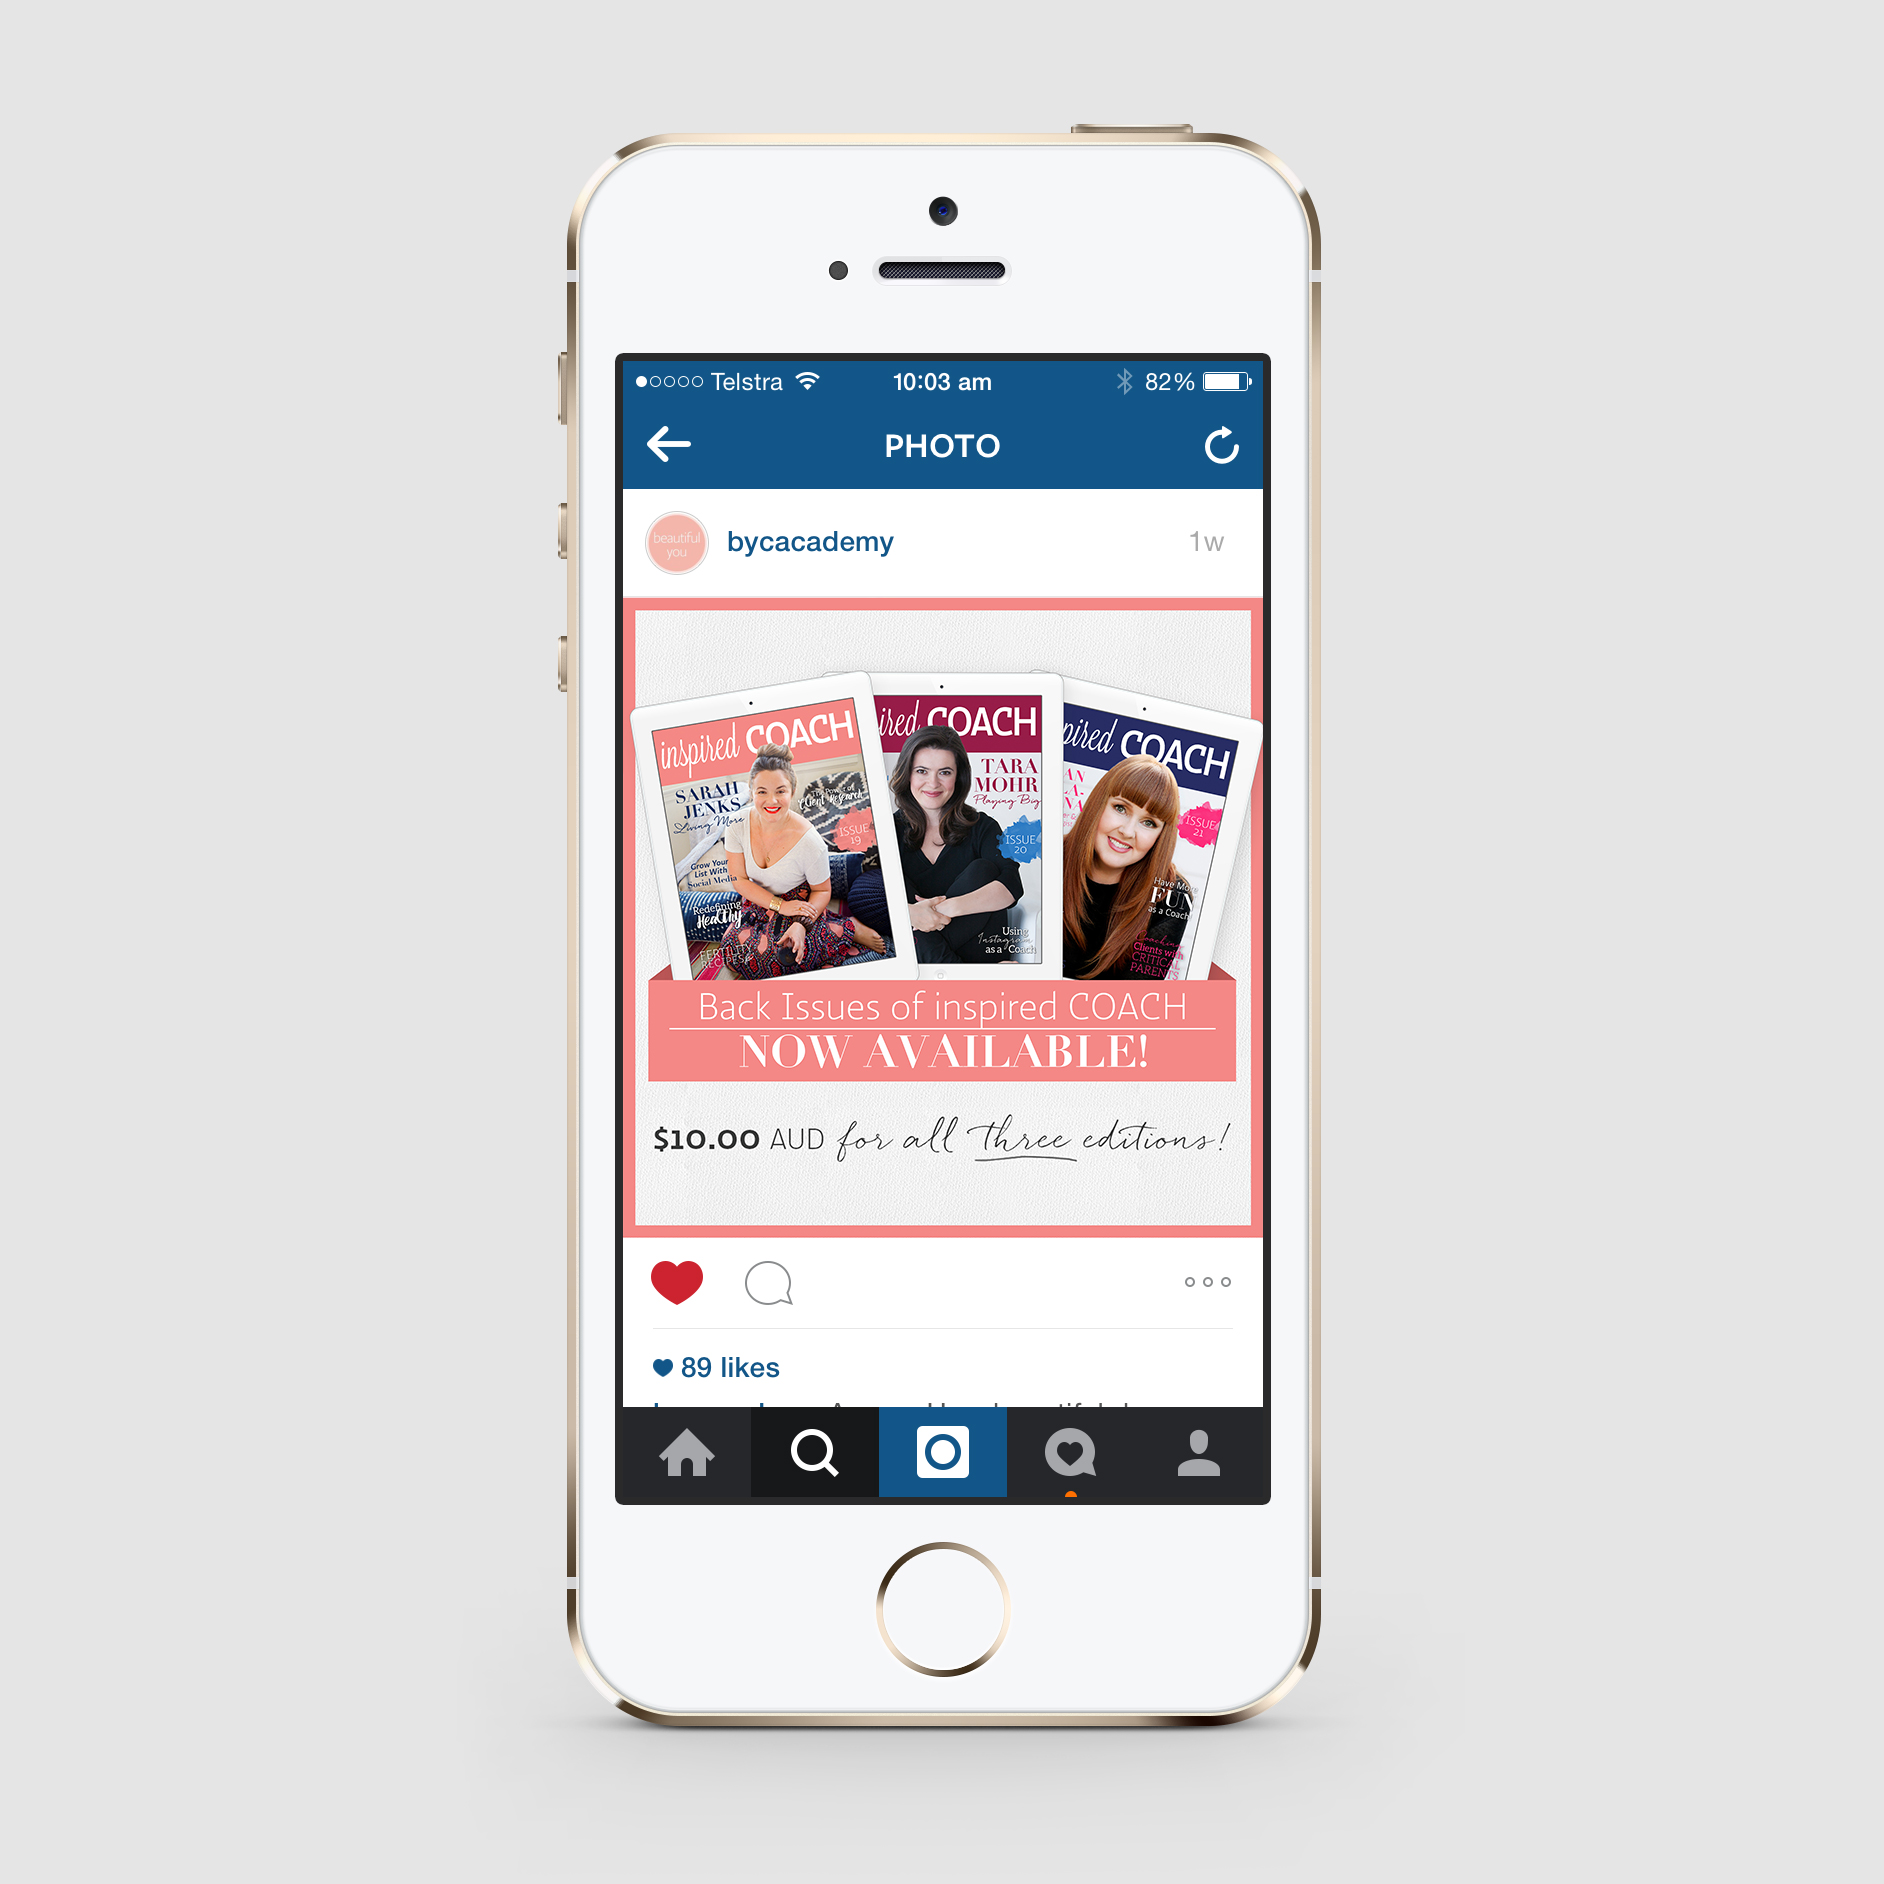  Promotional Instagram image for Beautiful You Coaching Academy - inspired COACH Magazine.&nbsp; 